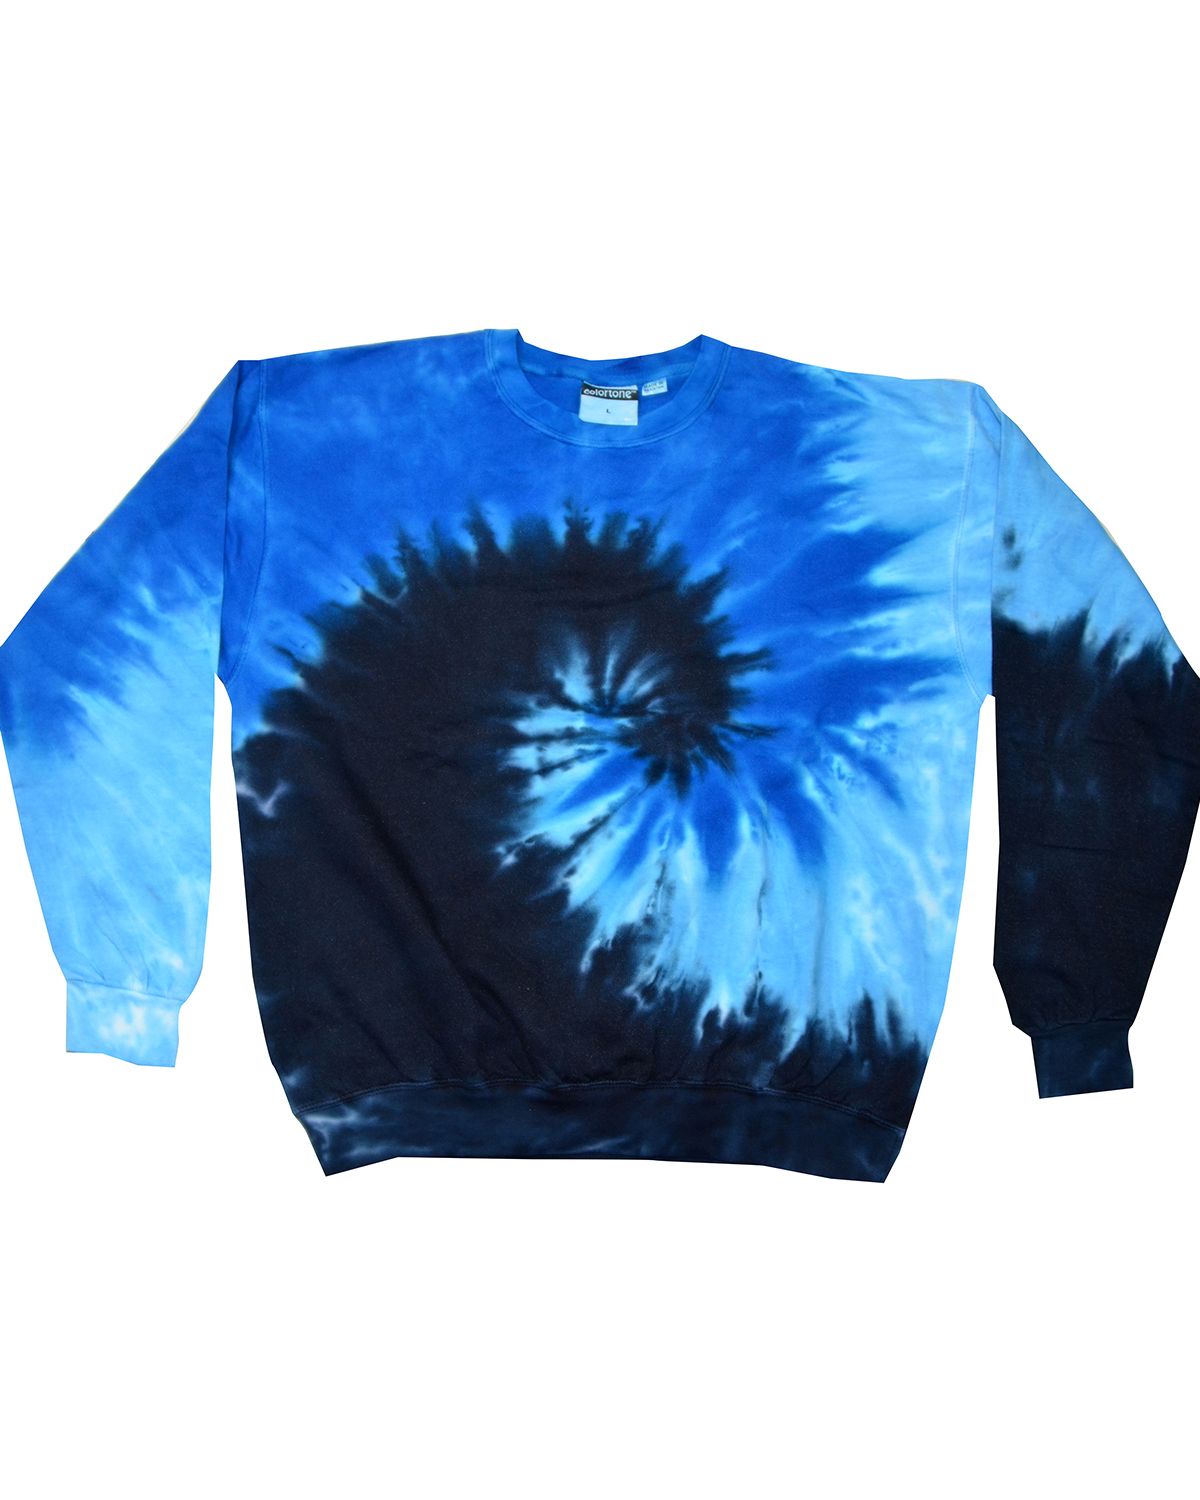 Tie-Dyed H8100 - Adult Tie-Dyed Fleece